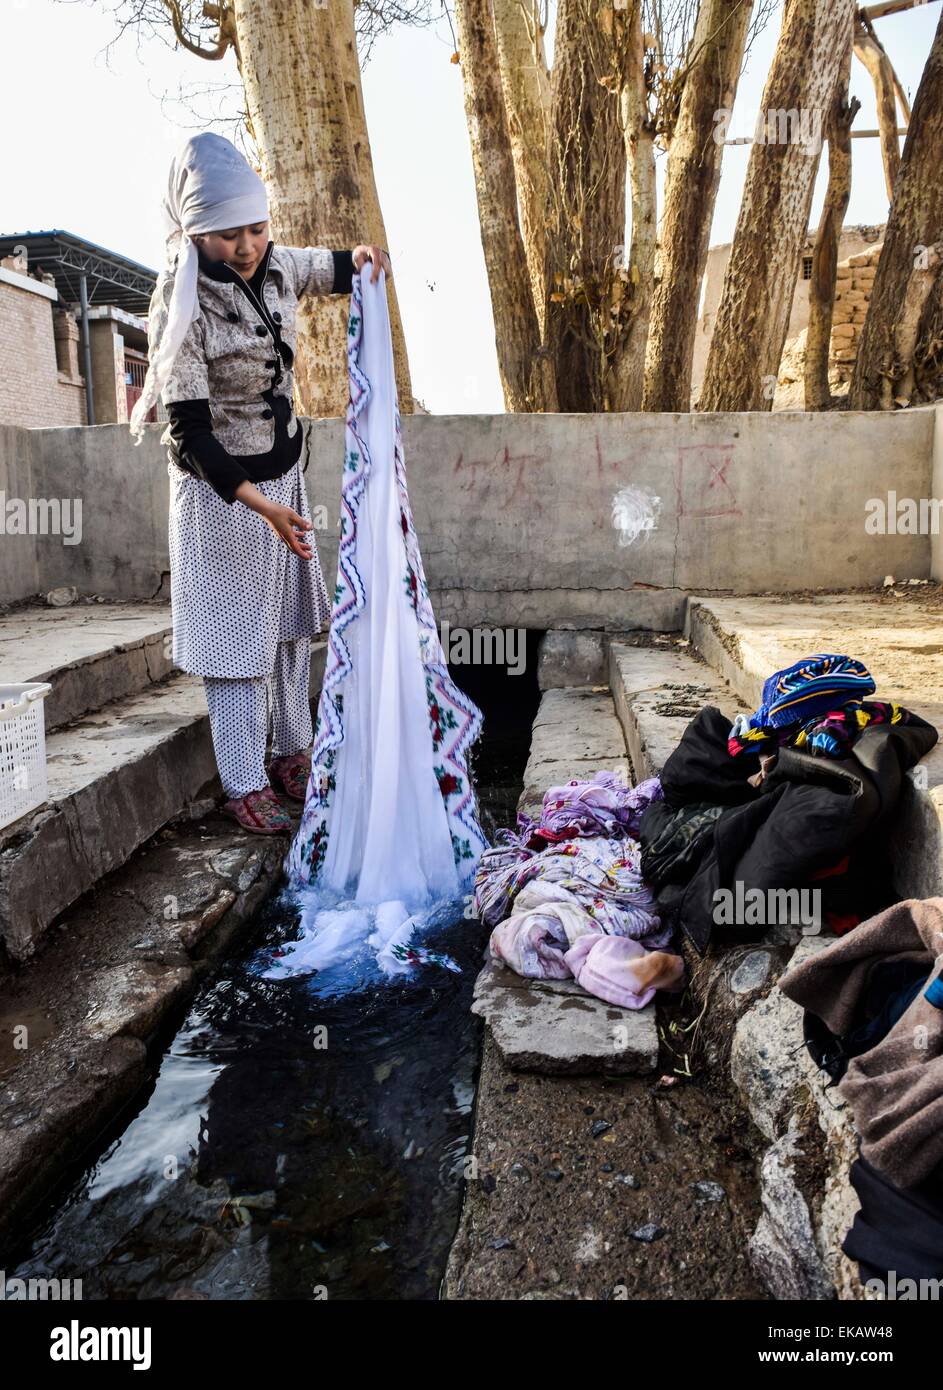 (150409) -- TURPAN, April 9, 2015 (Xinhua) -- A resident washes clothes in a canal of a karez irrigation system in Turpan, northwest China's Xinjiang Uygur Autonomous Region, April 3, 2015. The karez wells are vertical shafts and subterranean canals that surface in the form of ditches and small ponds. The karez irrigation system, which are composed of vertical shafts, subterranean and ground canals, and small reservoirs, was built 2,000 years ago and is considered one of China's greatest surviving ancient man-made structures, along with the Great Wall and the Grand Canal. Turpan, the Stock Photo